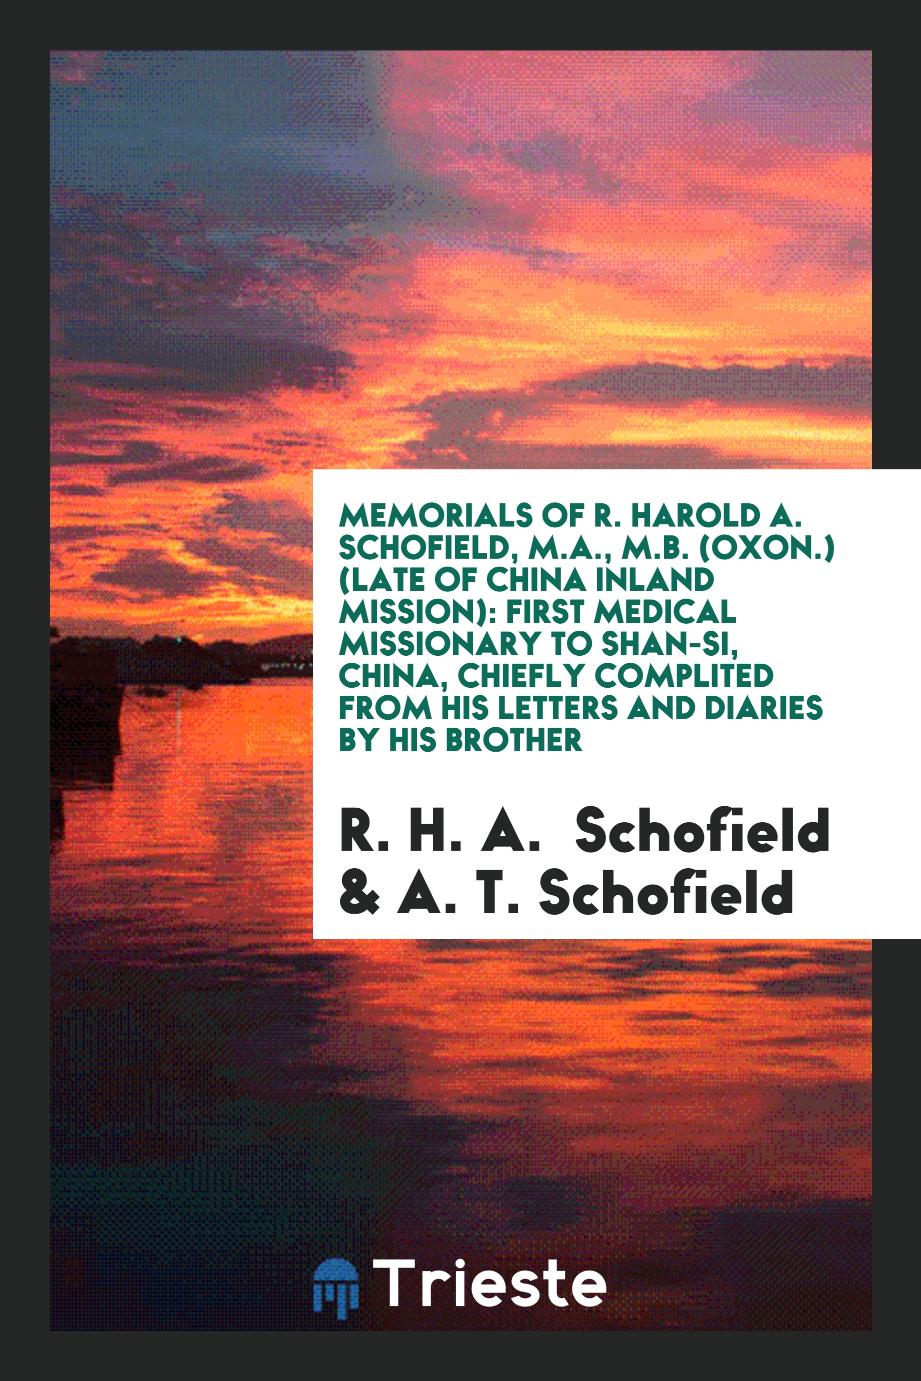 Memorials of R. Harold A. Schofield, M.A., M.B. (Oxon.) (Late of China Inland Mission): First Medical Missionary to Shan-Si, China, Chiefly Complited from His Letters and Diaries by His Brother